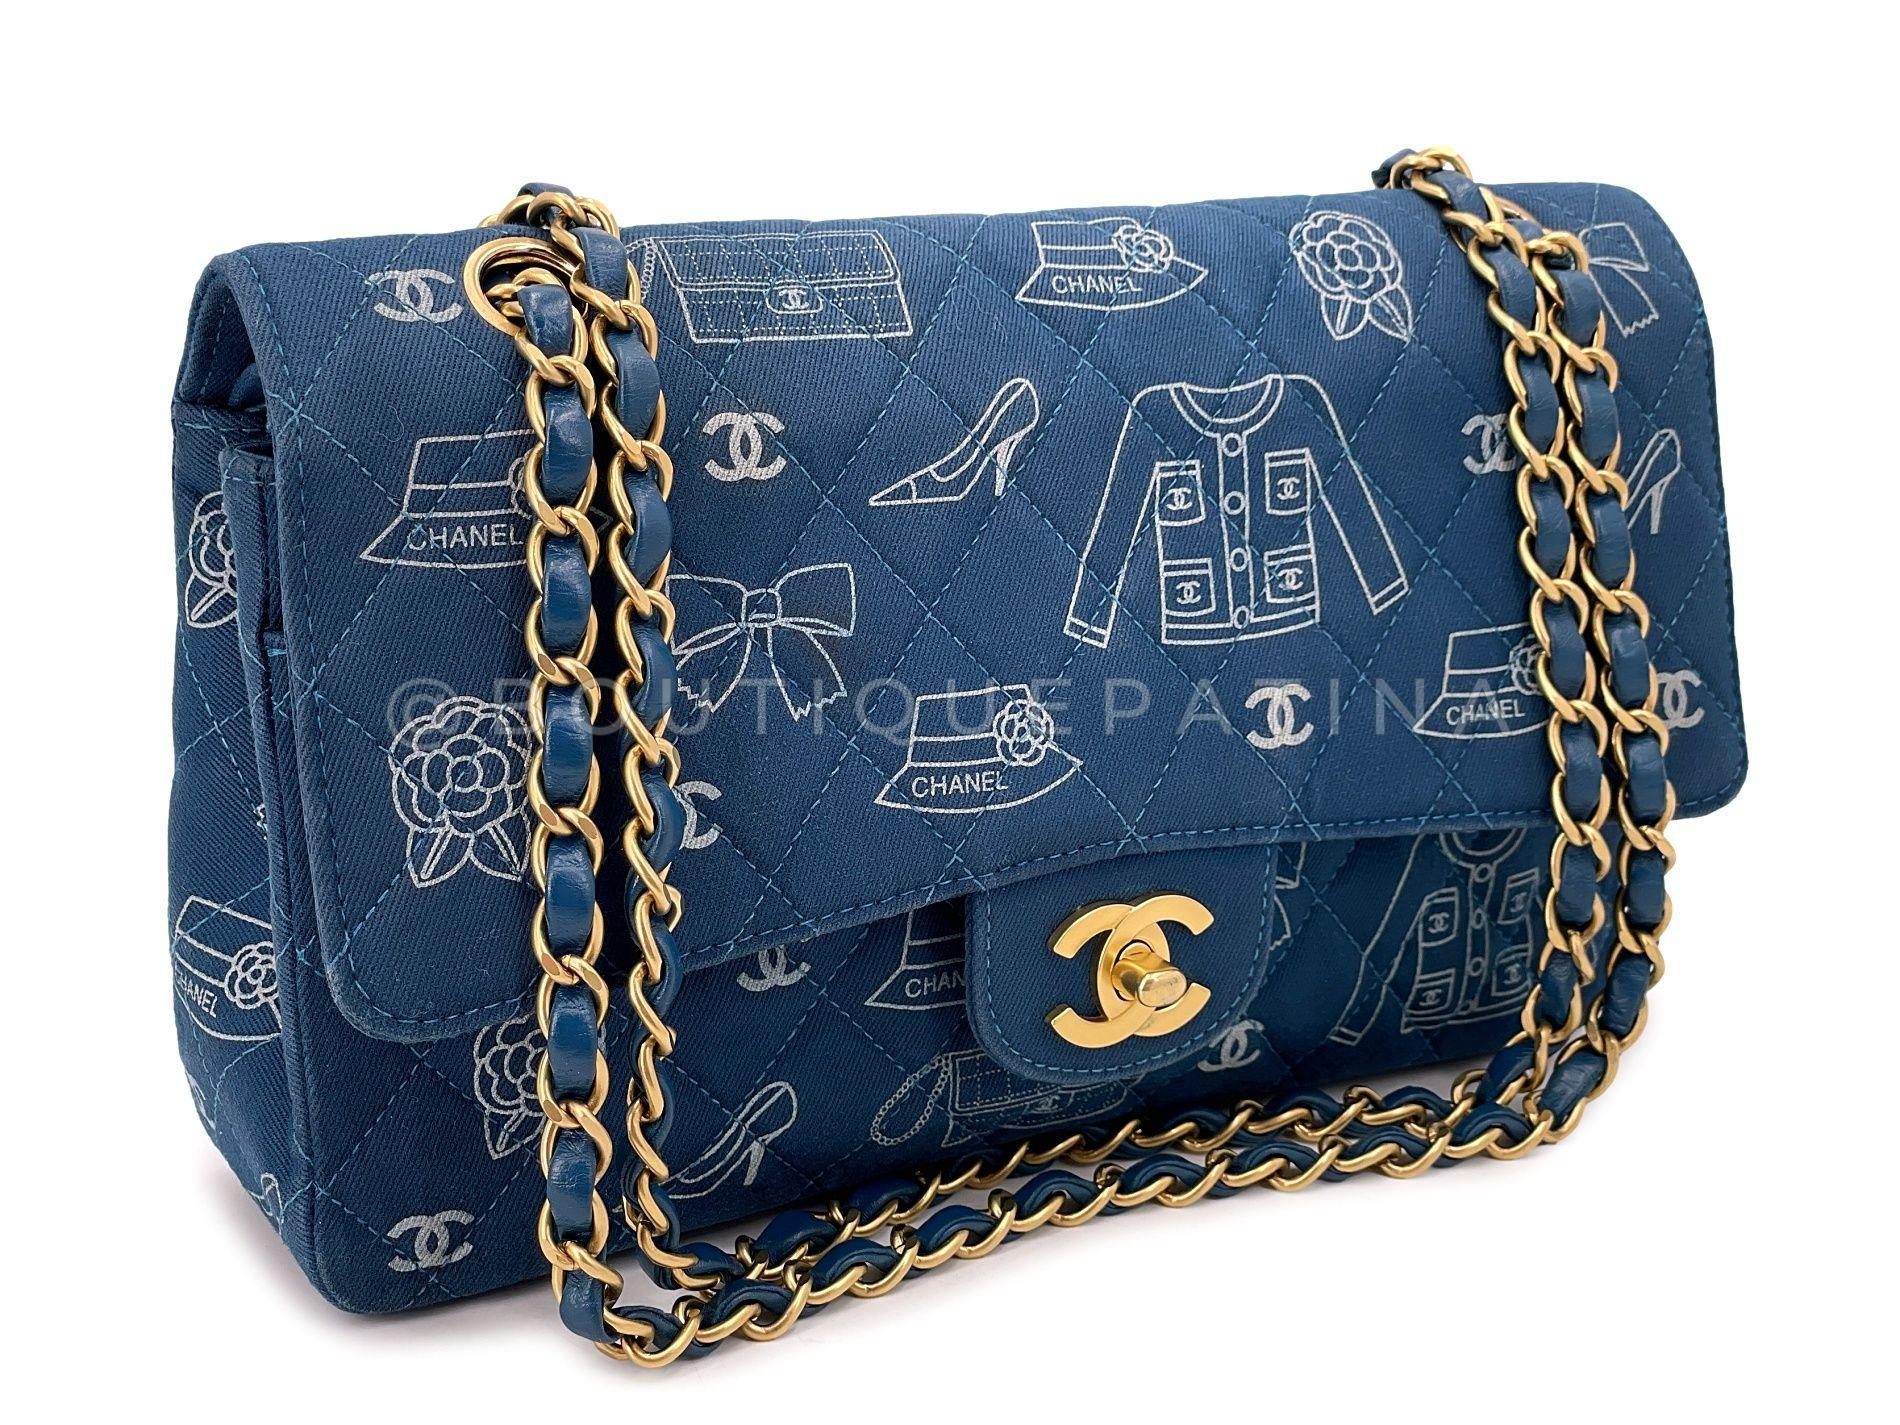 Store item: 68092
Rare Chanel 2003 Vintage ICONS Blue Canvas Printed Medium Classic Double Flap Bag 24k GHW is a very special gem from Lagerfeld's 2003 Icons collection.

While this model is a unique find, it's even harder to find this in this